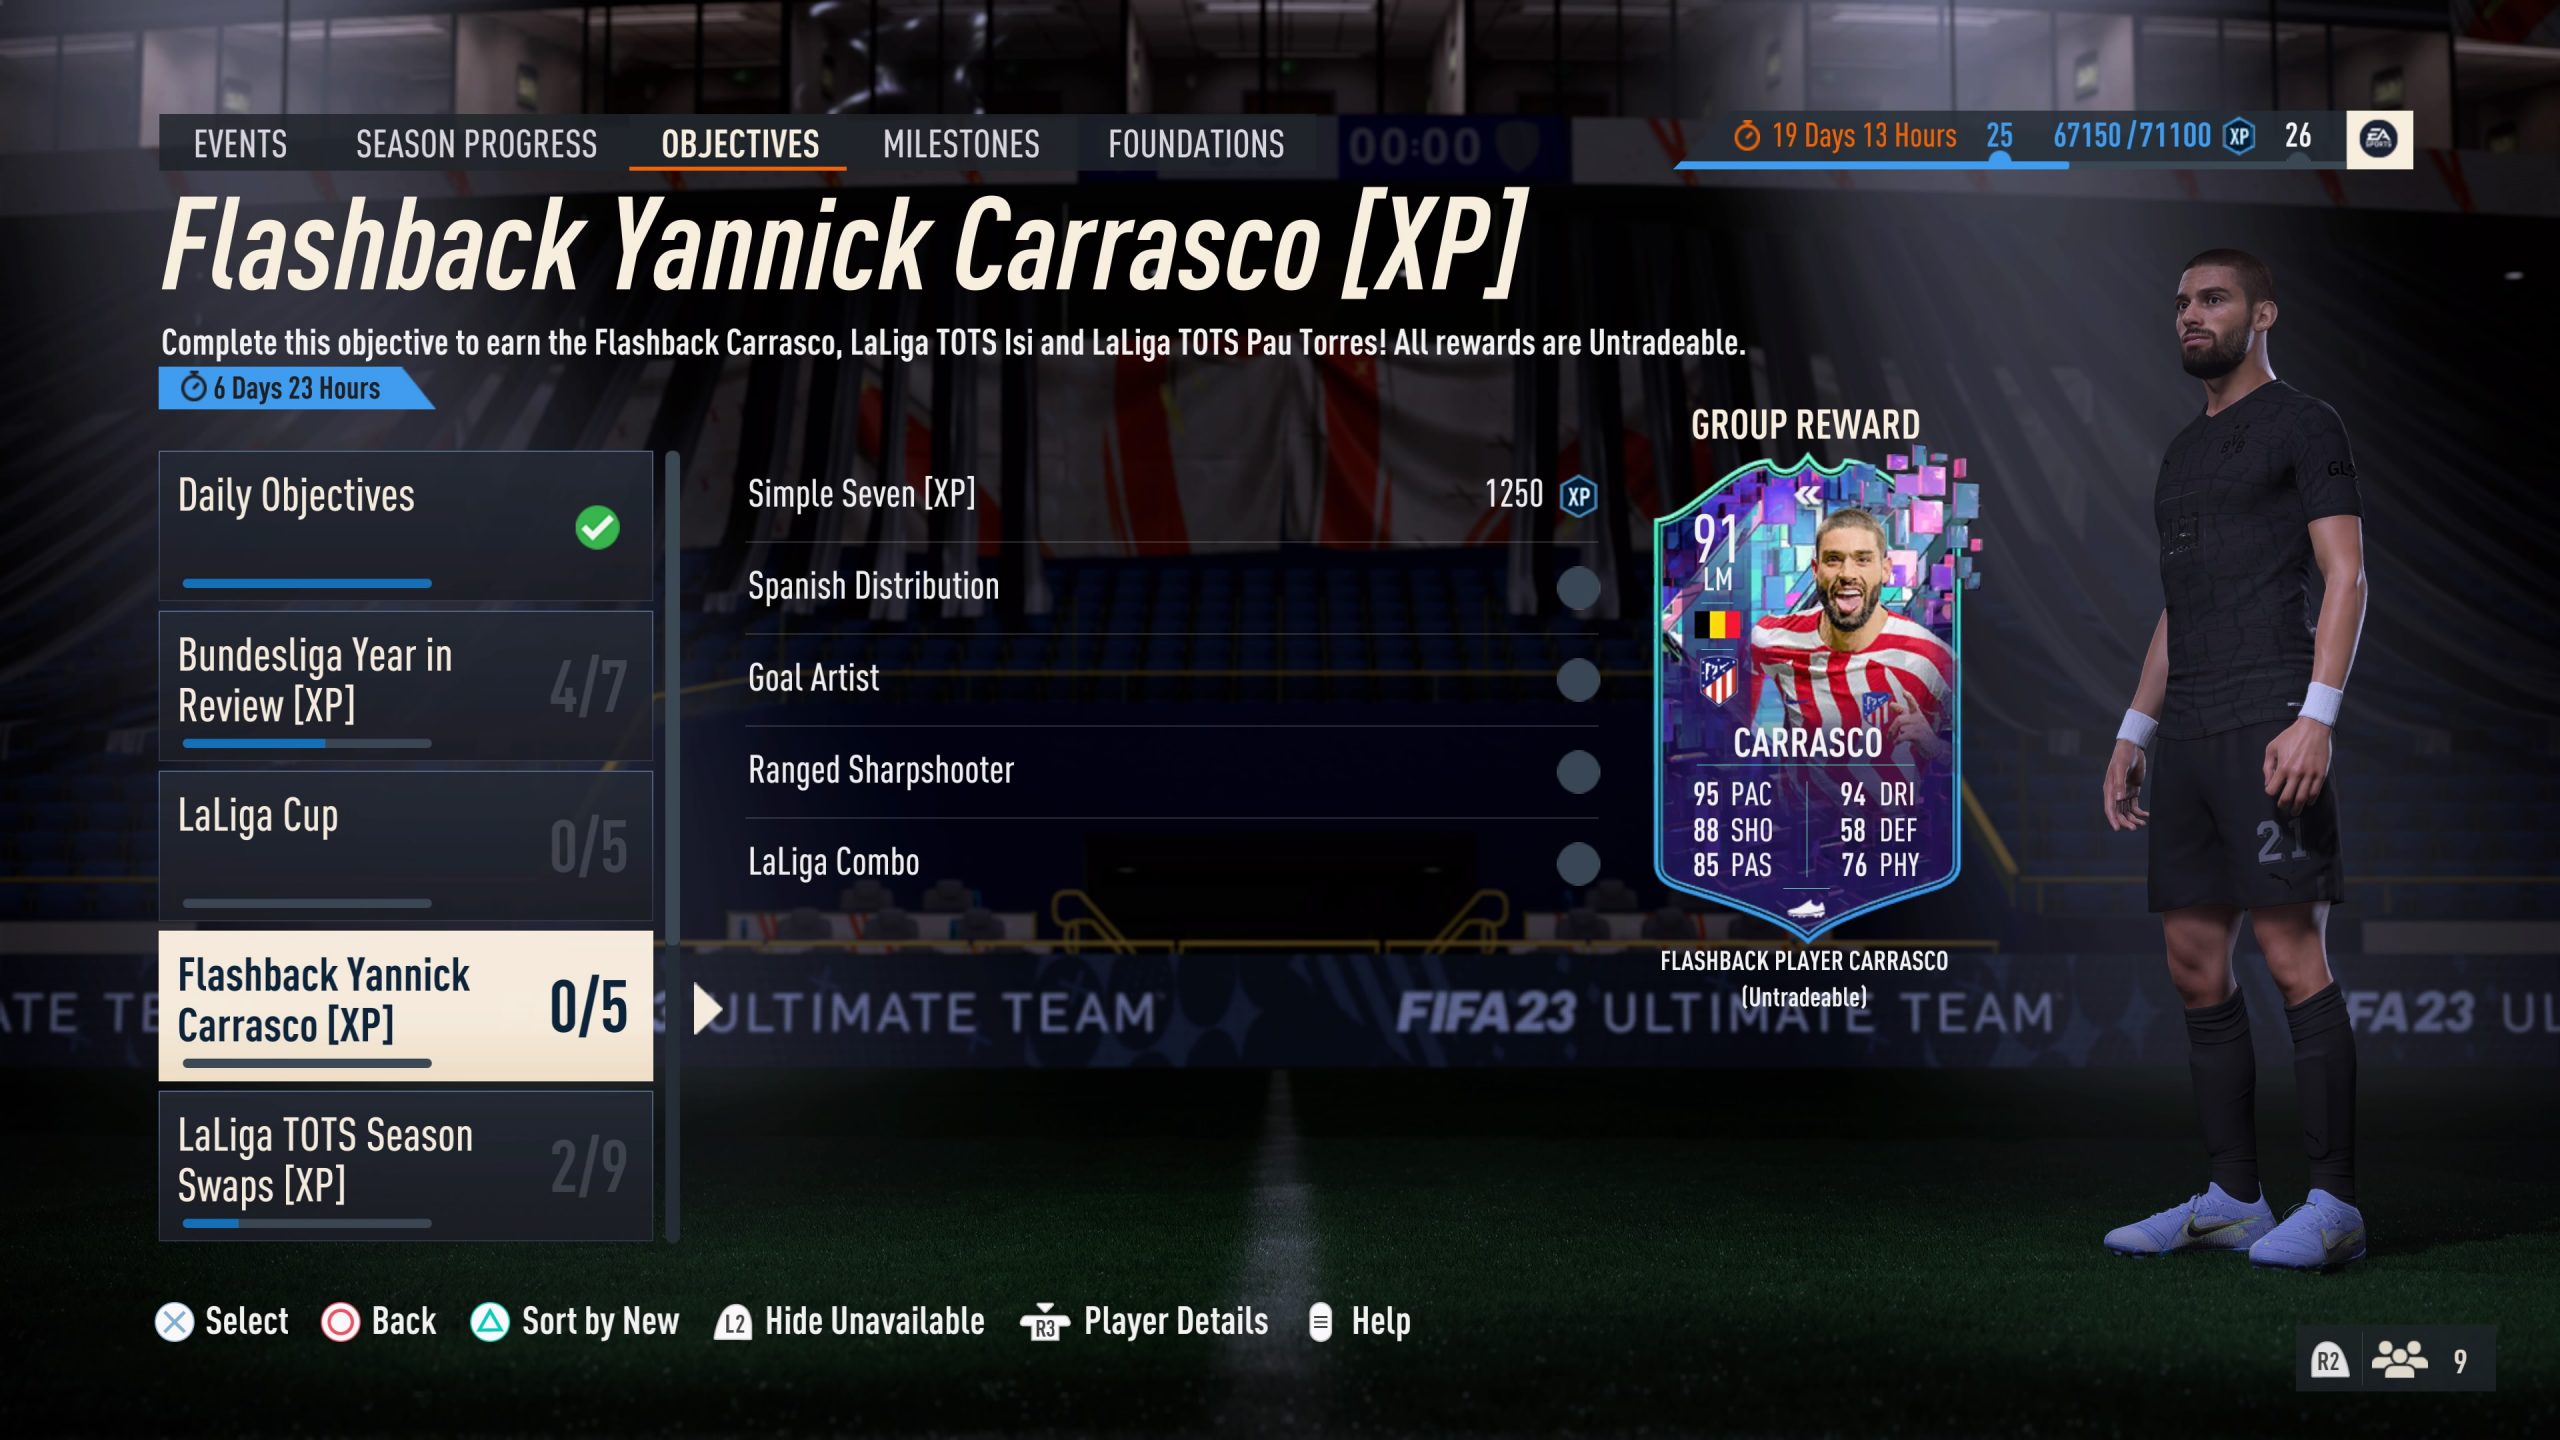 How To Complete Flashback Yannick Carrasco in 8 Games